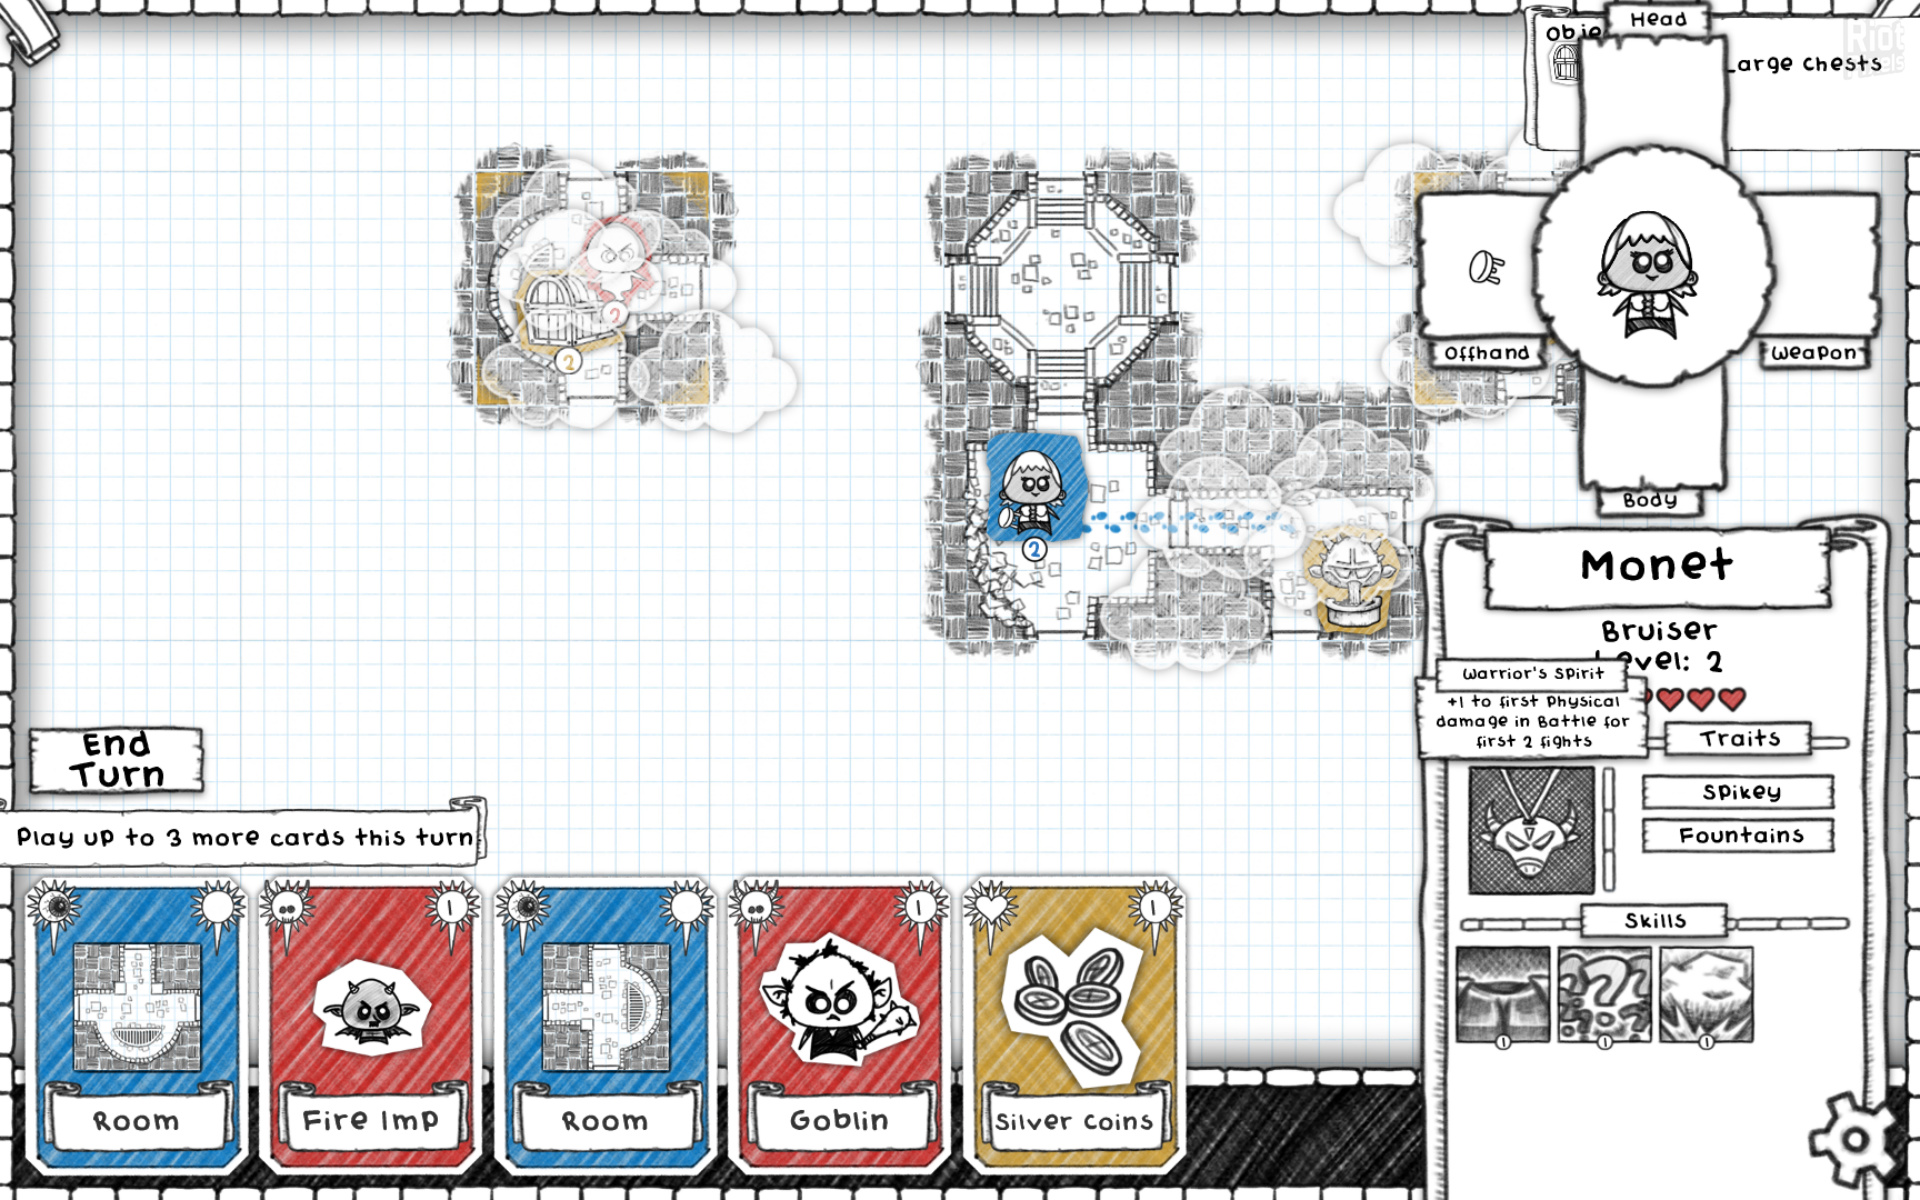 guild of dungeoneering limit to guild size